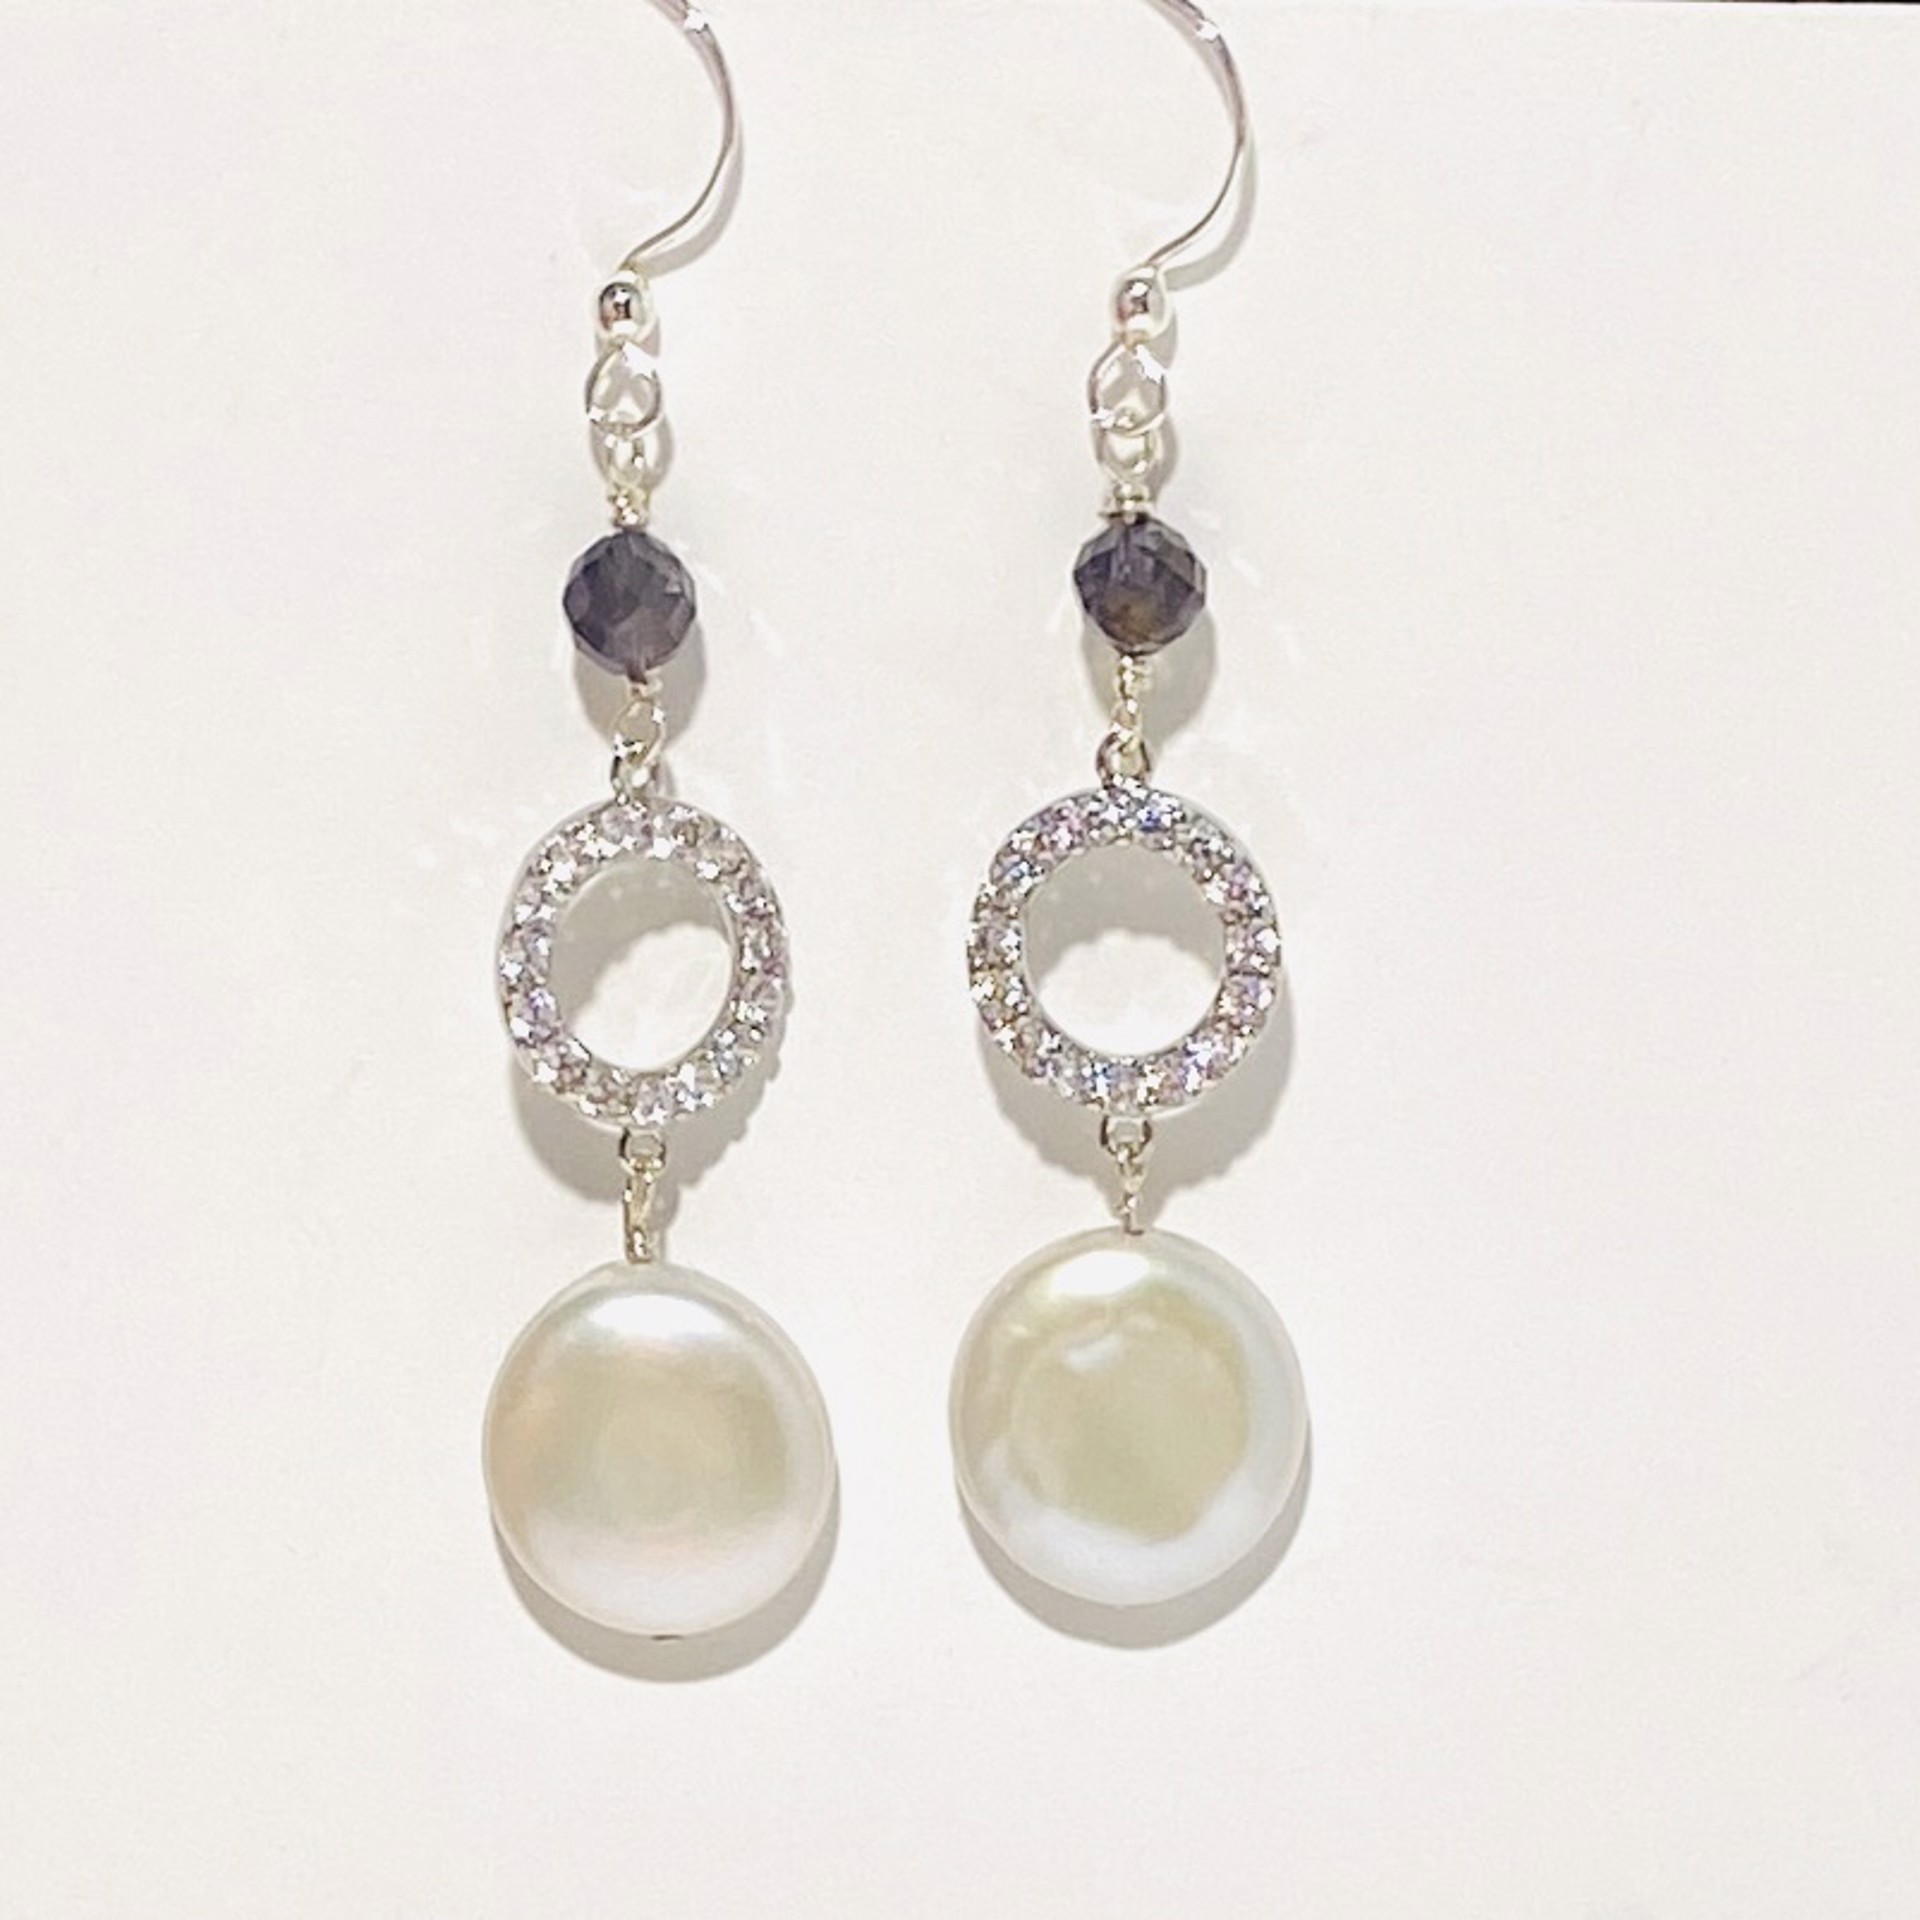 Coin Pearl, Pavé Crystal, Sapphire Earrings LR23-29 by Legare Riano